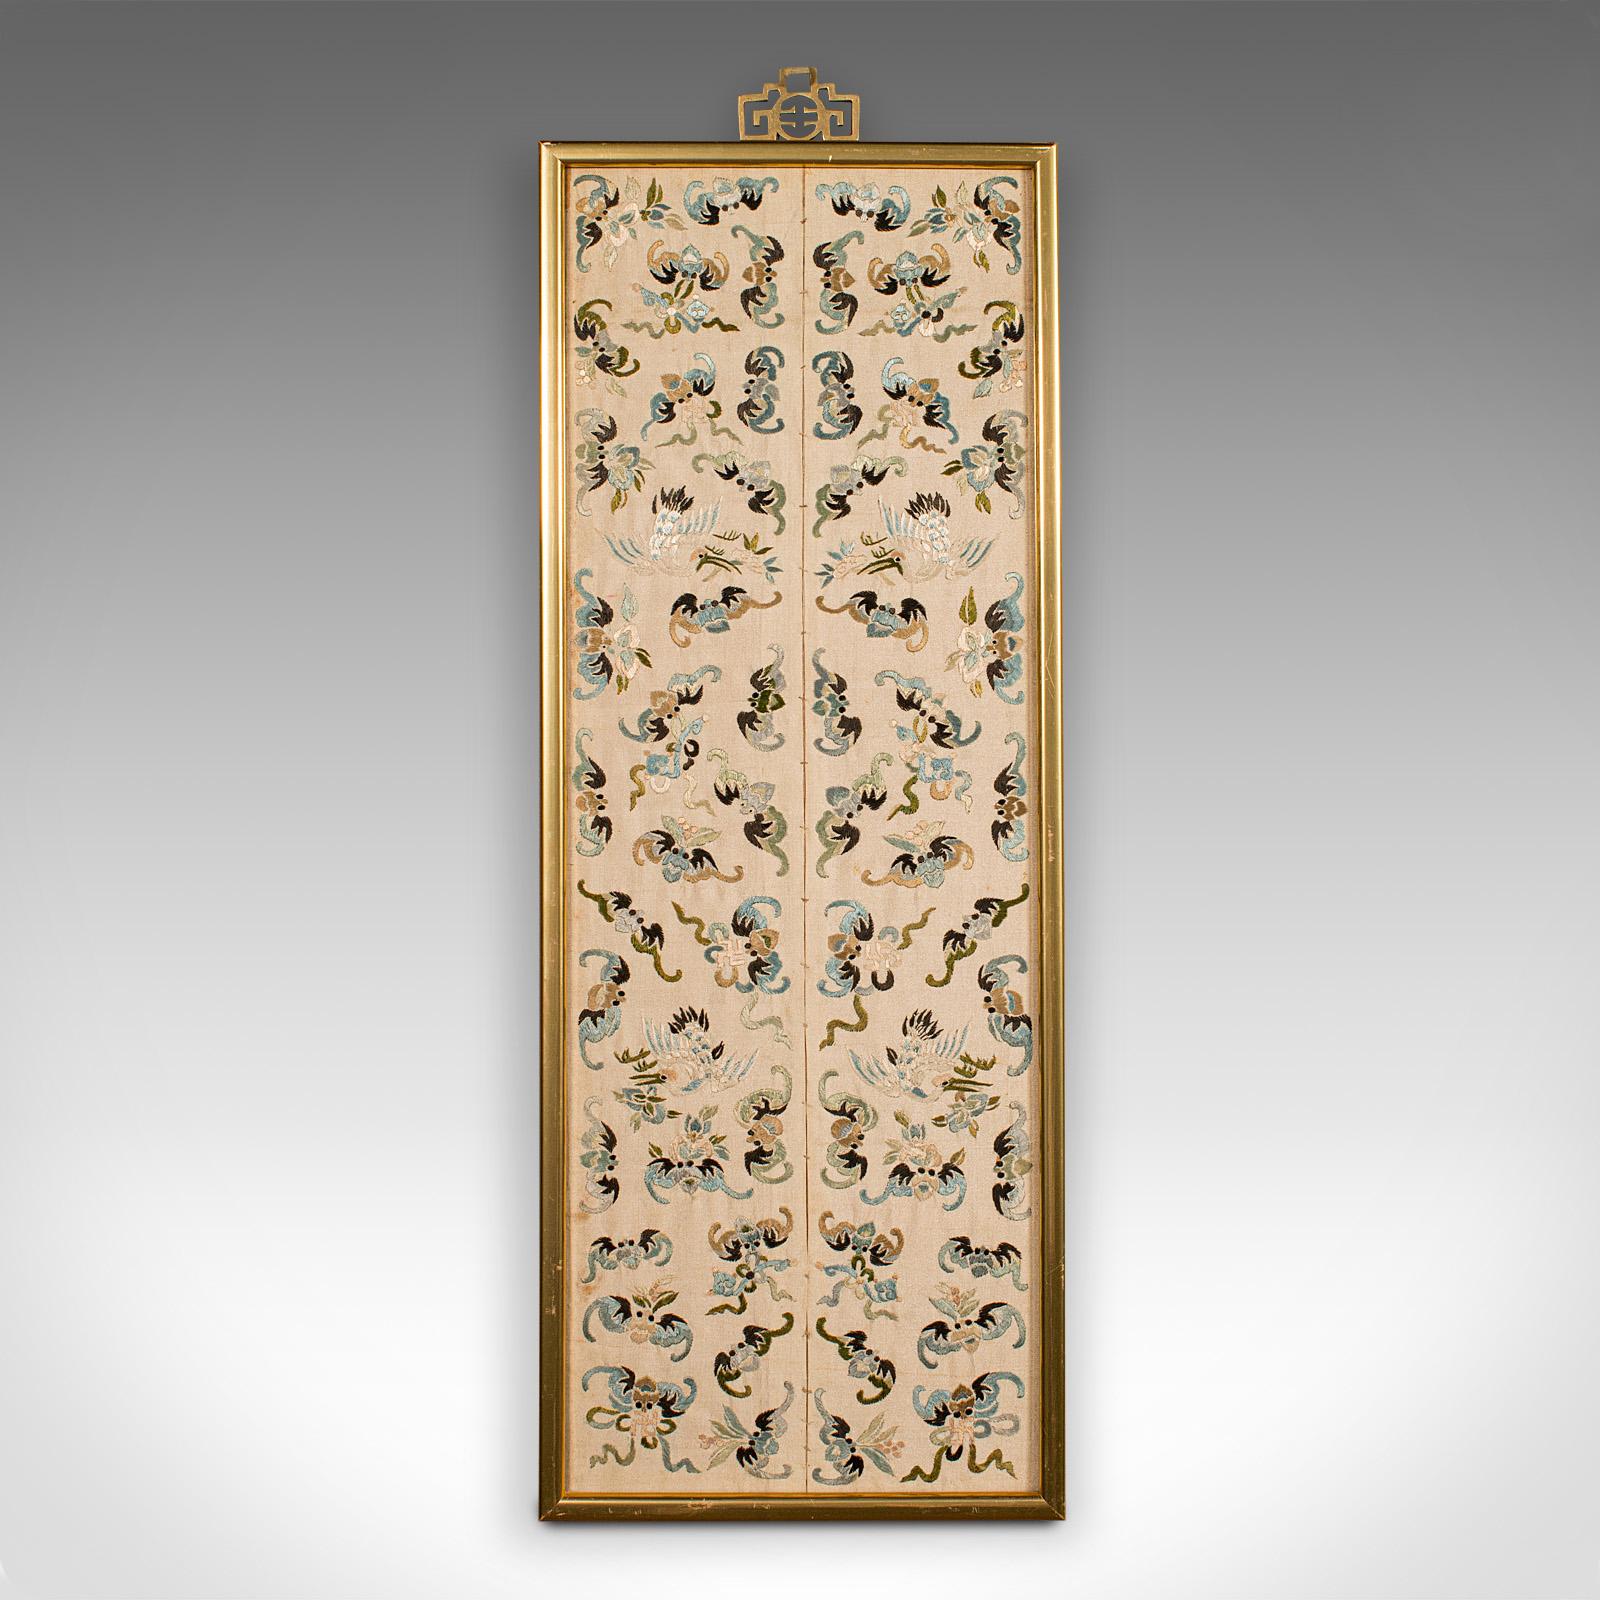 This is an antique decorative panel. A Chinese, framed silk cotton embroidery, dating to the late Victorian period, circa 1900.

Tastefully presented wall panel with appealing colour
Displays a desirable aged patina and in good order
Quality silk